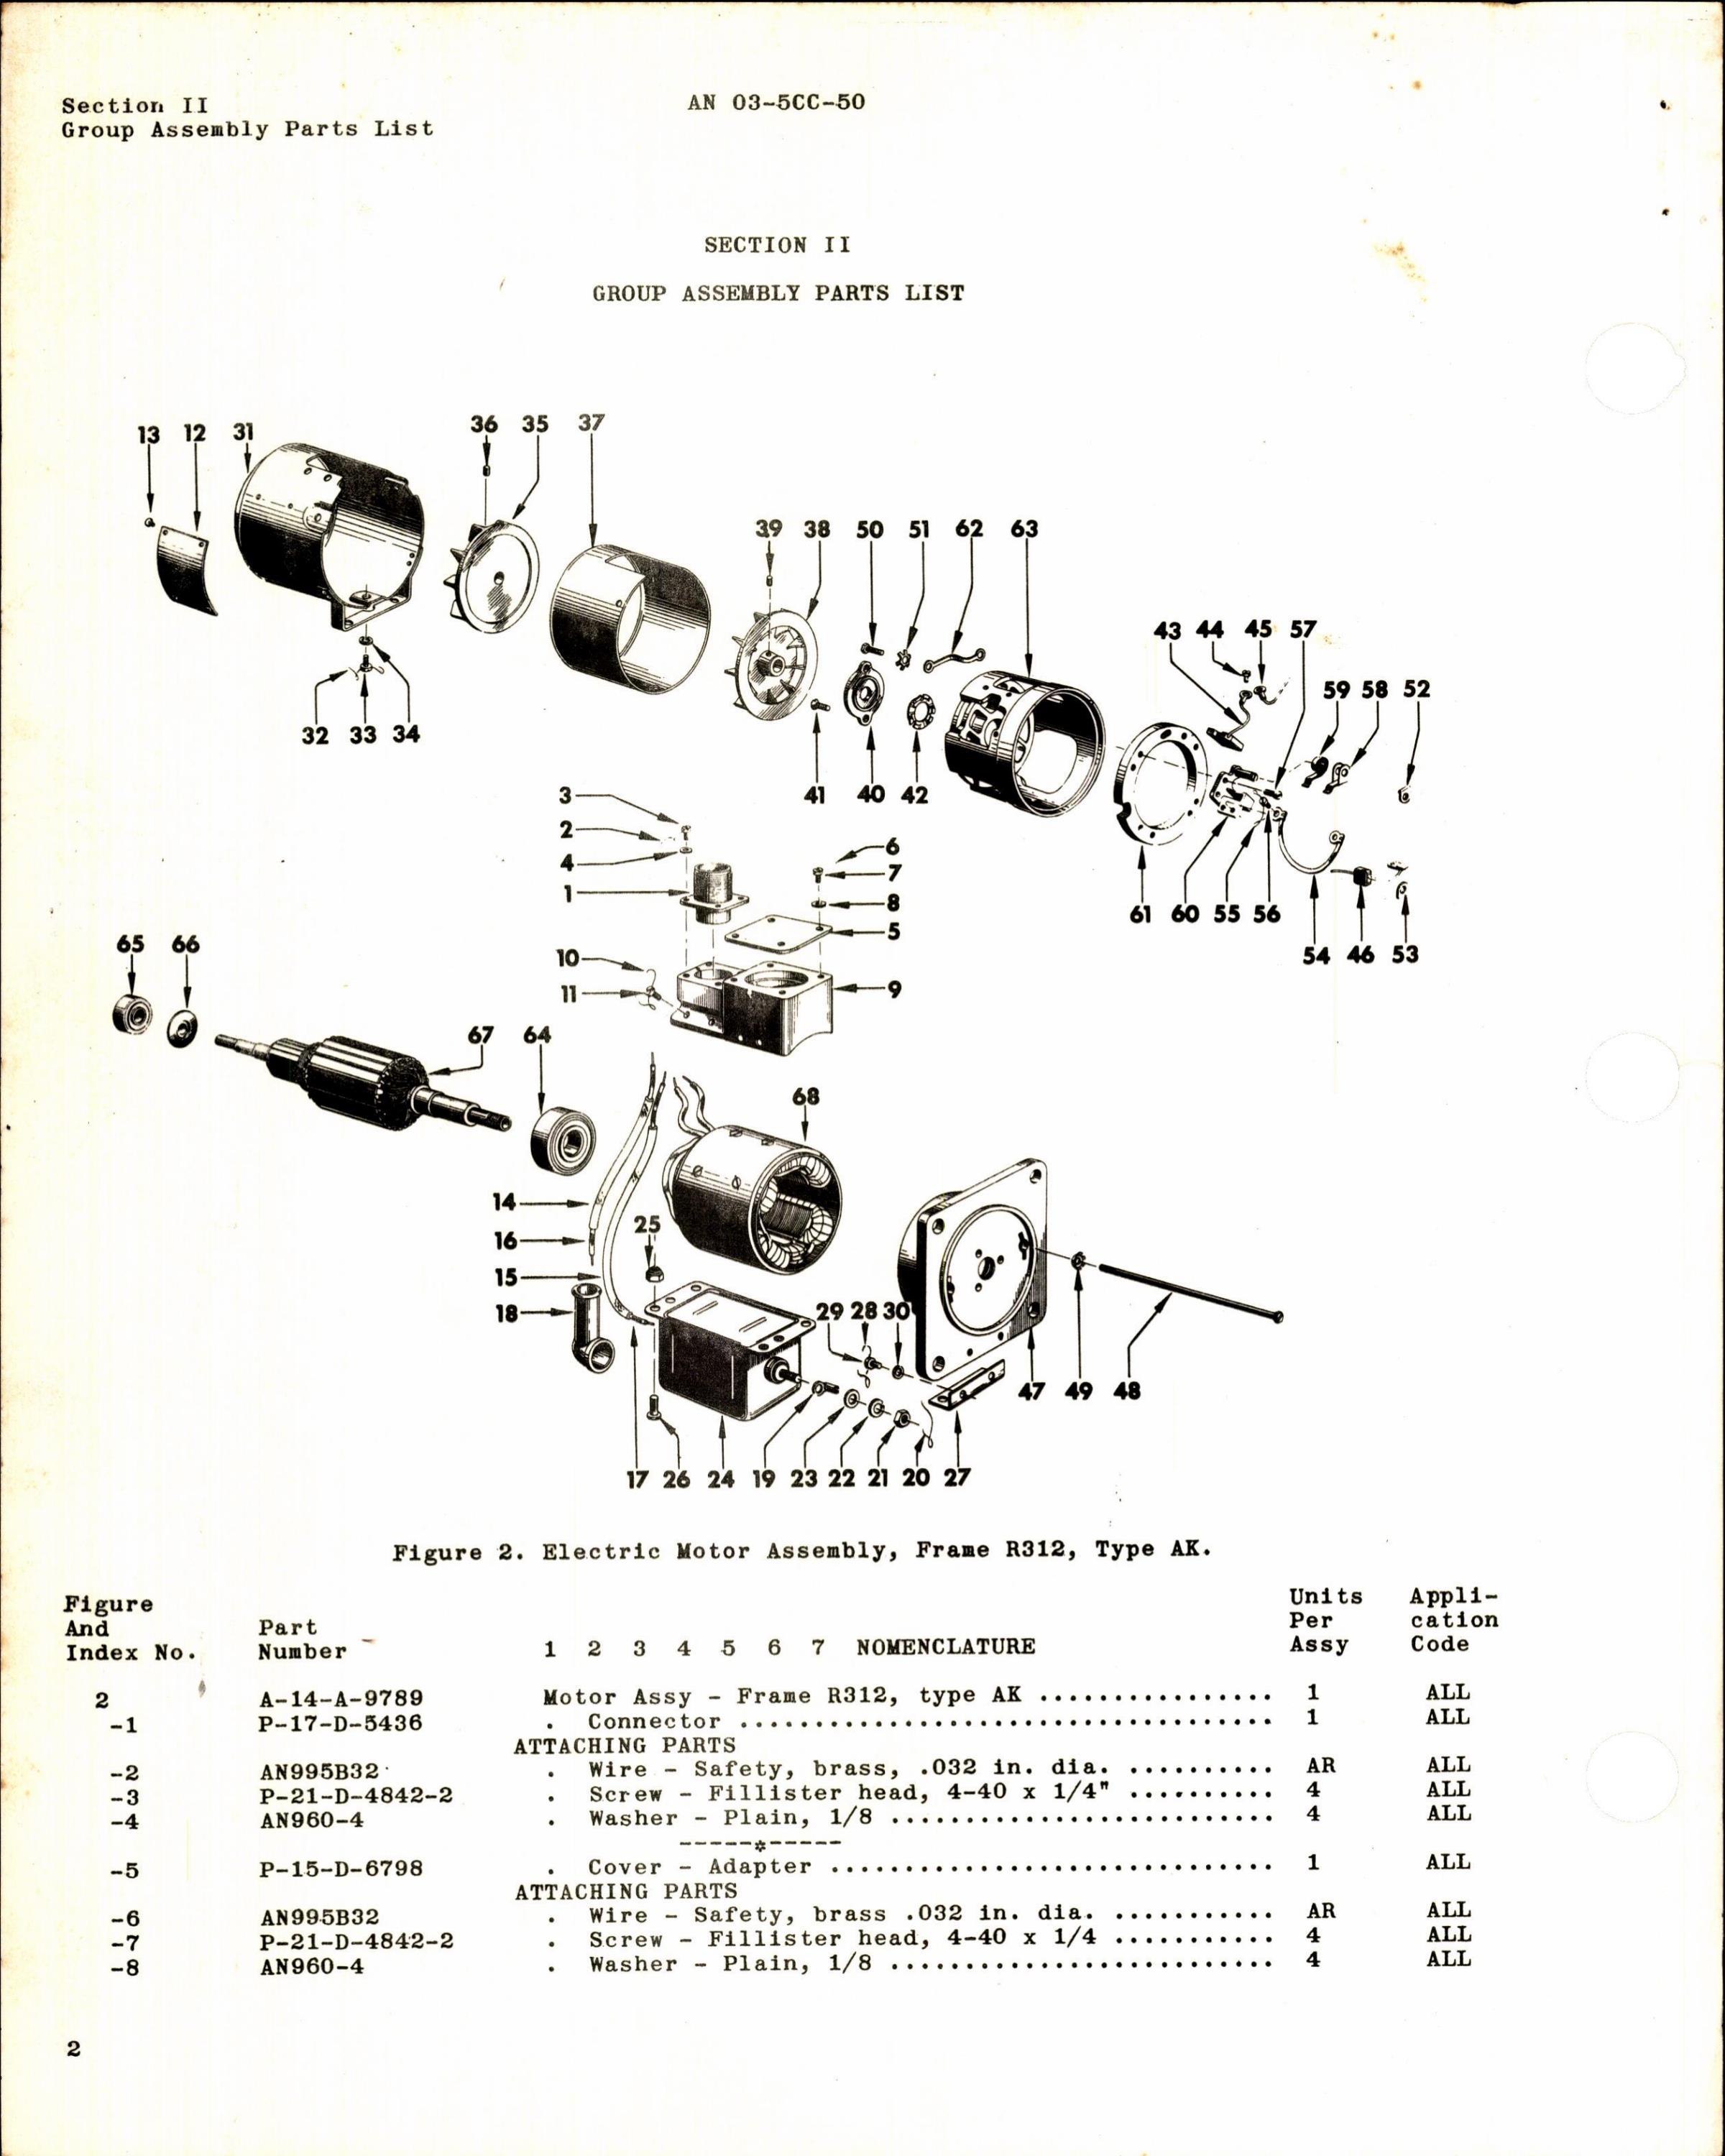 Sample page 4 from AirCorps Library document: Parts Catalog for Westinghouse Type AK Electric Motor